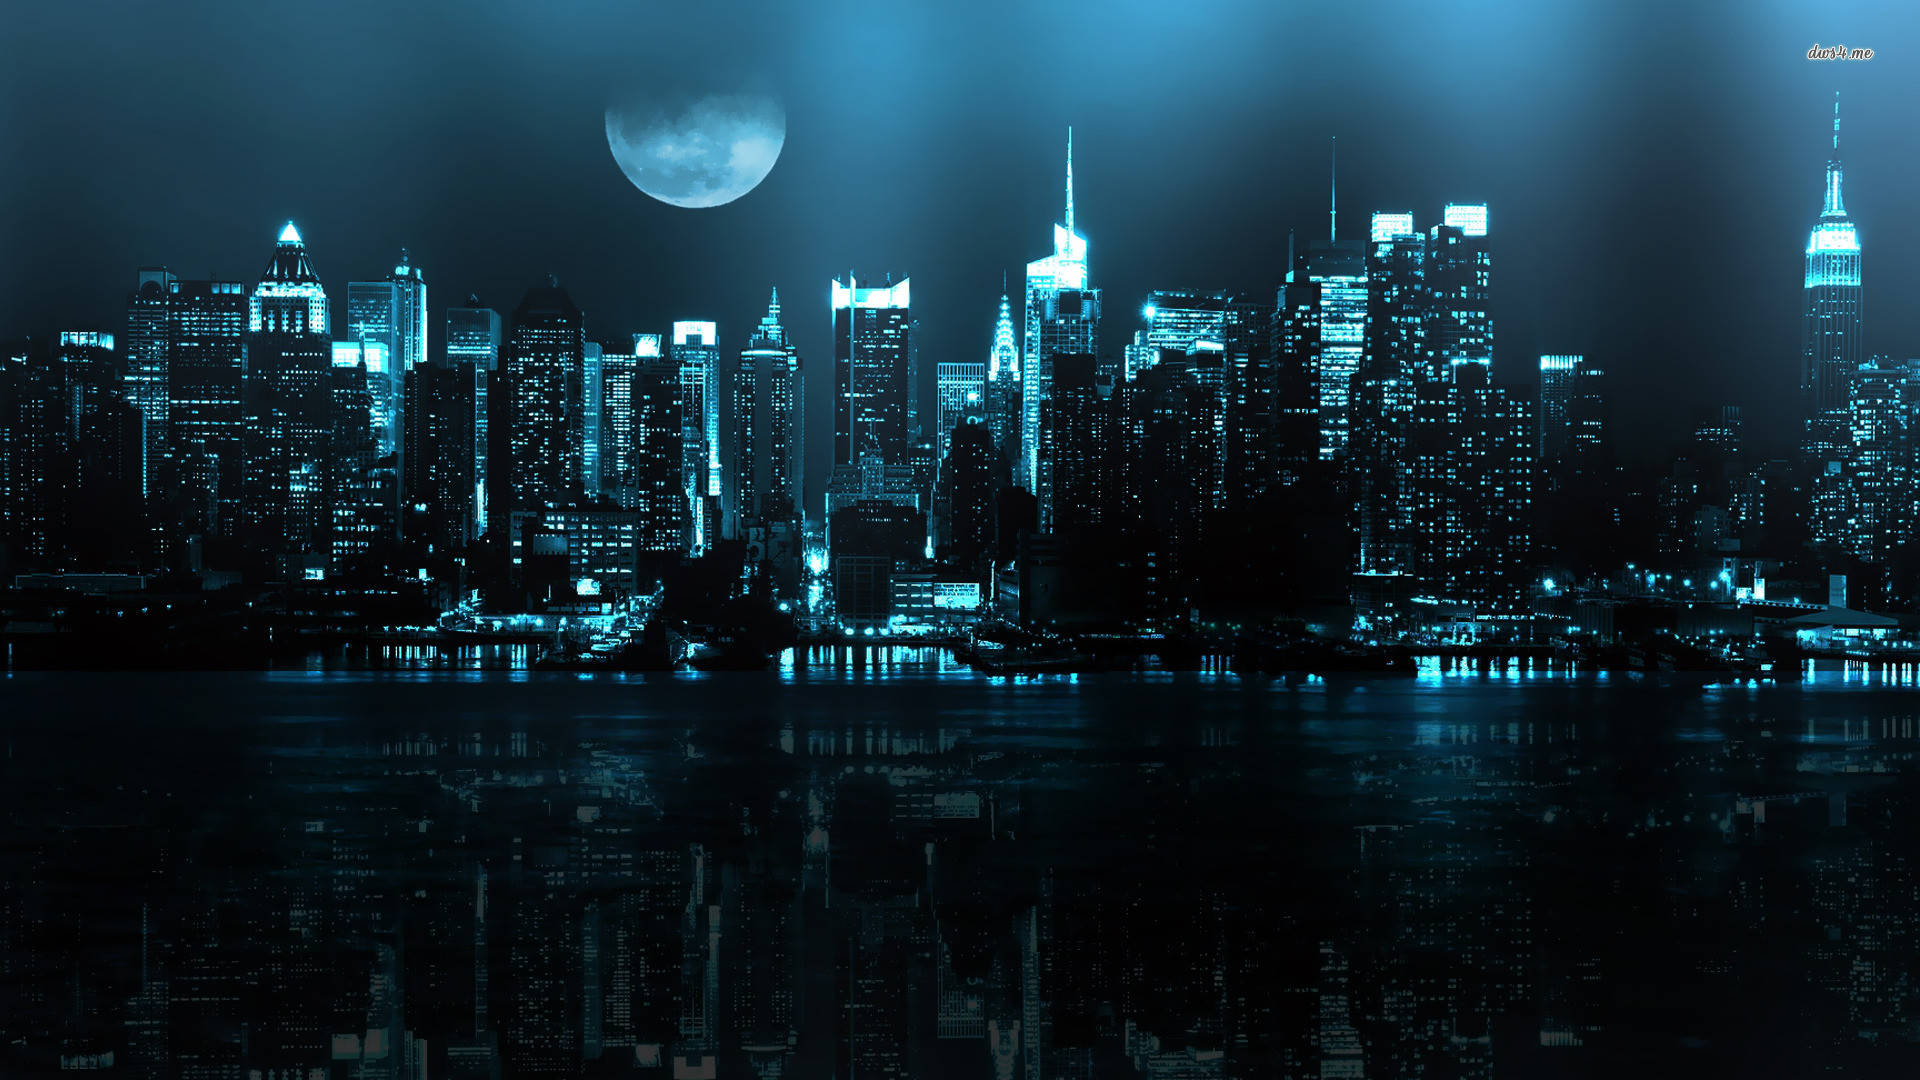 200+] New York City Night Wallpapers for FREE 